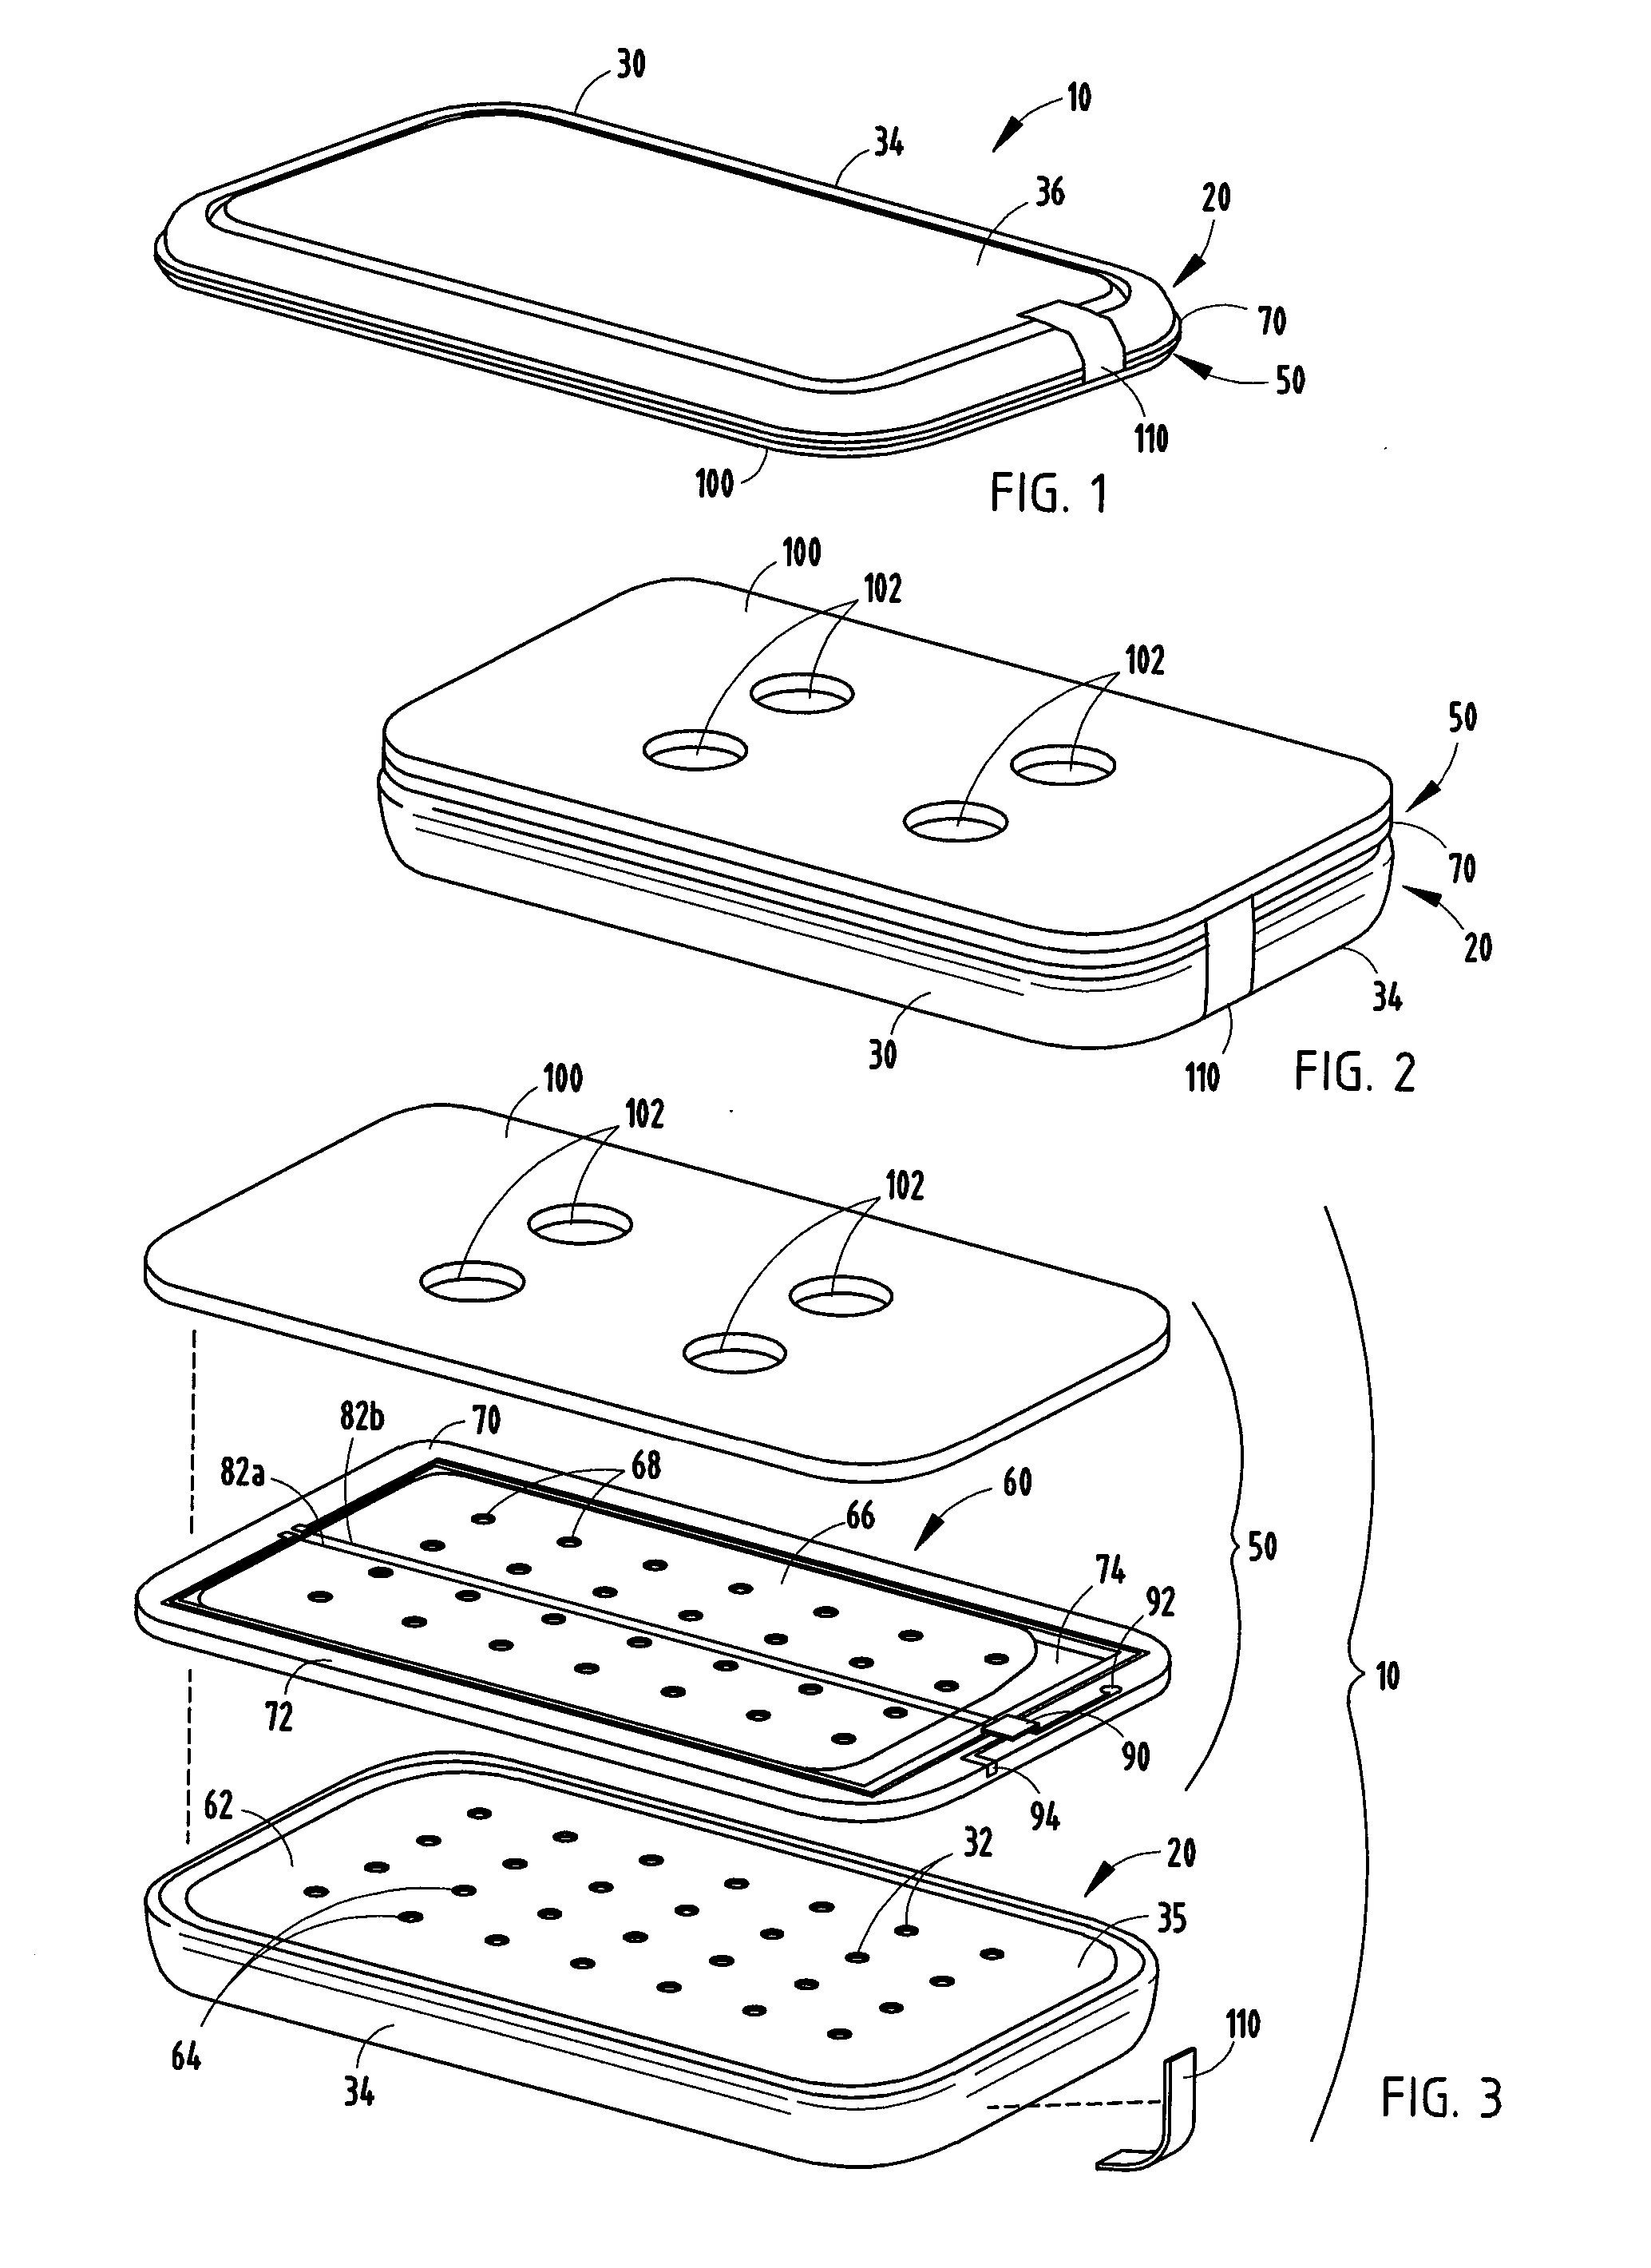 Fluid Manager Including a Lever and a Battery Including the Same